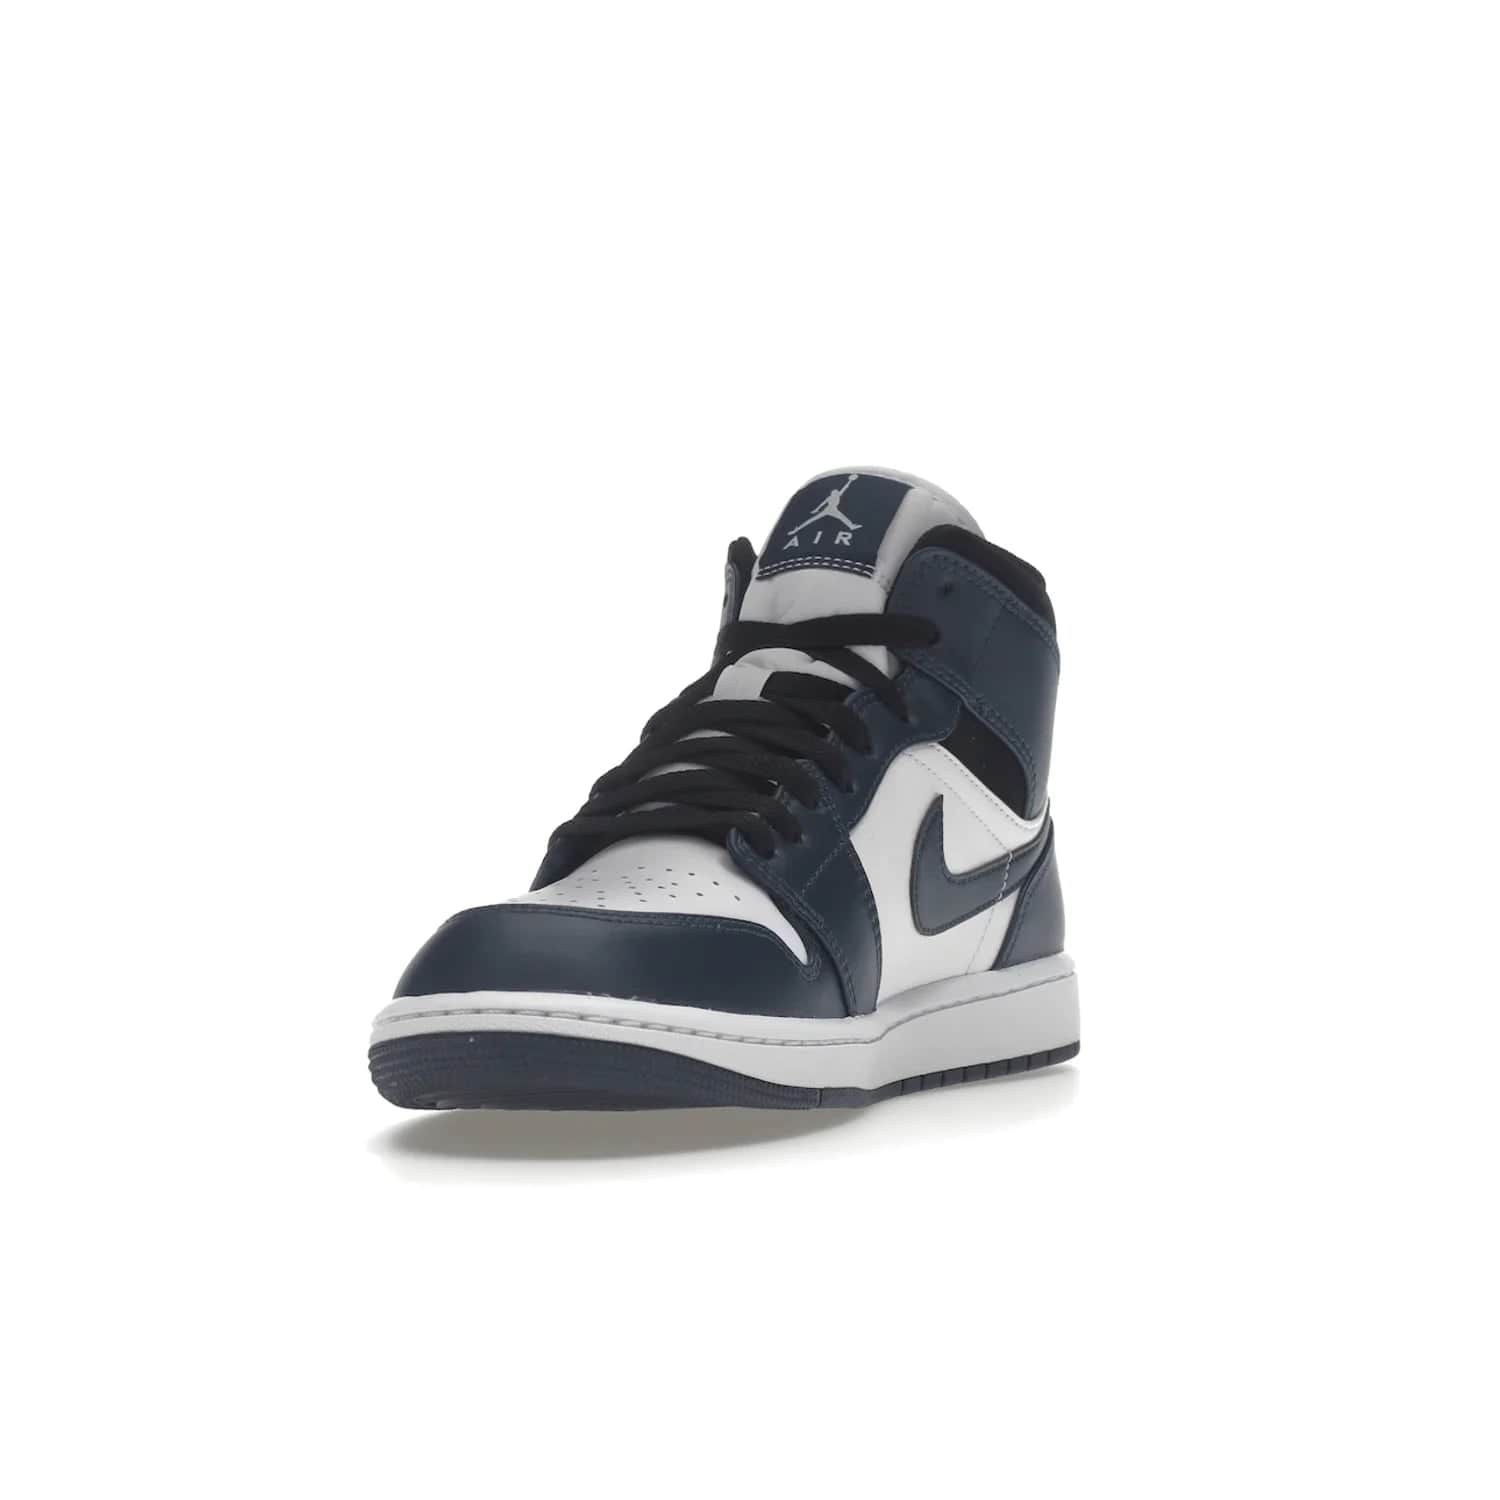 Jordan 1 Mid Armory Navy - Image 13 - Only at www.BallersClubKickz.com - The Jordan 1 Mid Armory Navy: classic basketball sneaker with soft white leather upper, deep navy blue overlays, and black leather ankle detailing. Iconic style with Jordan Wings logo and Jumpman label.